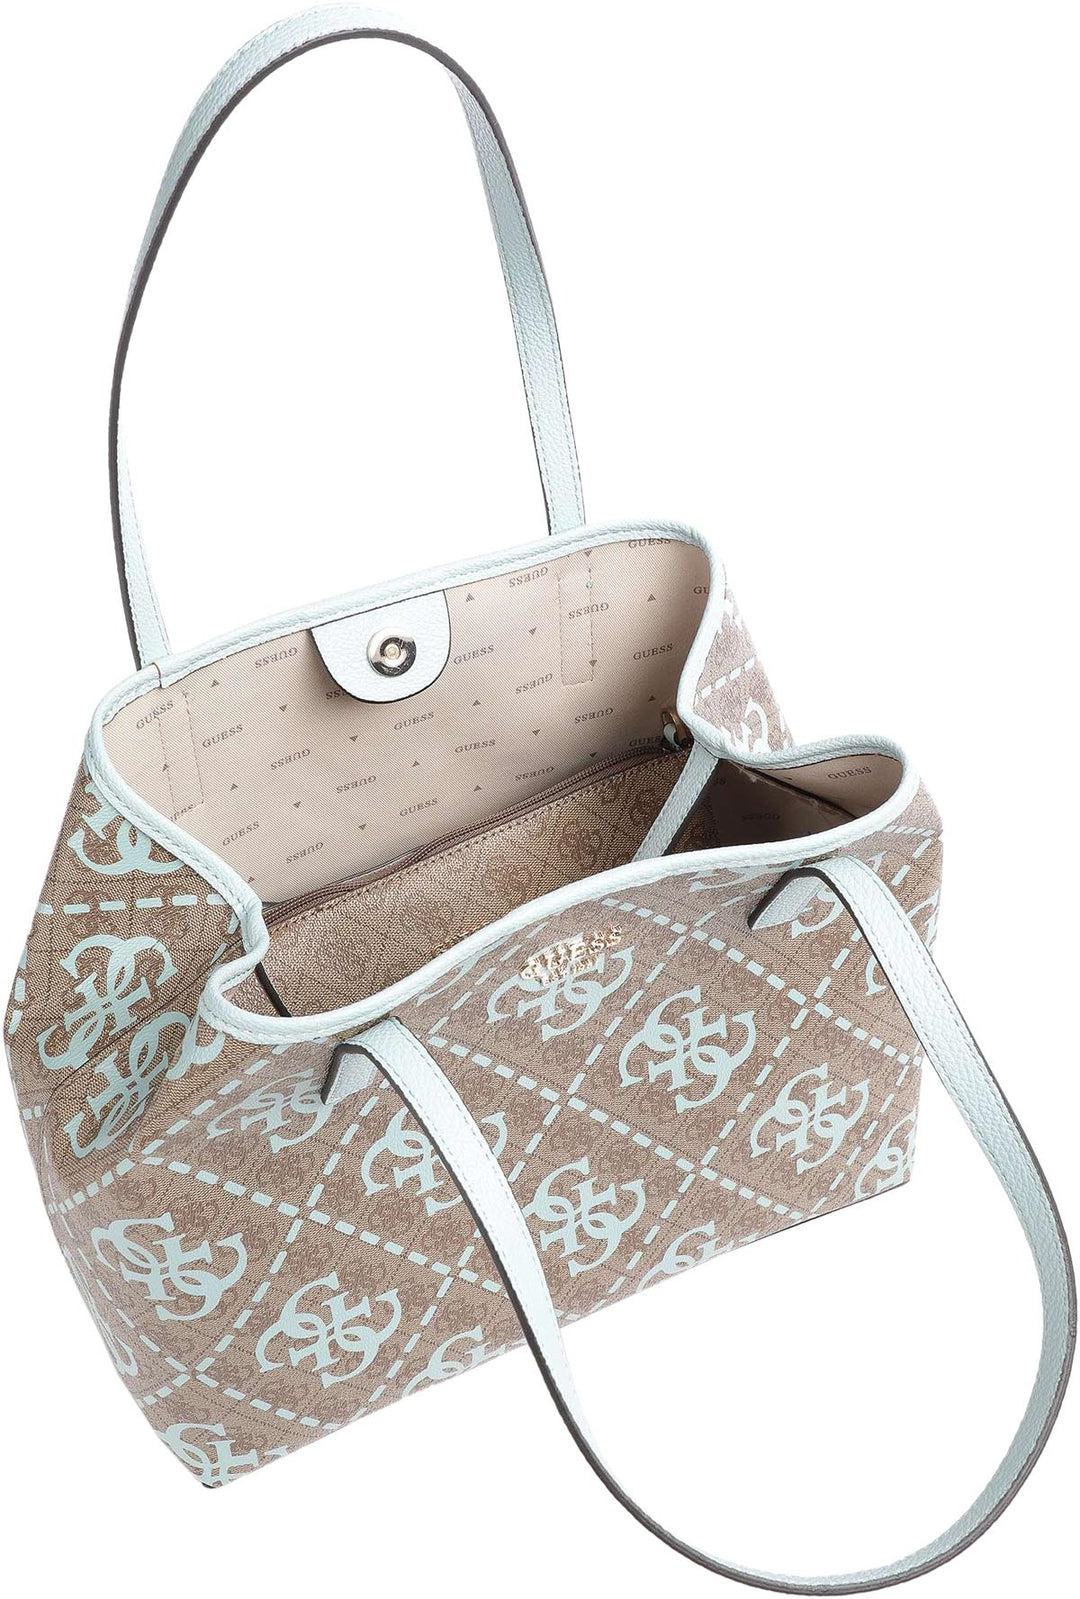 Buy Guess Pink Vikky Tote for Women in KSA